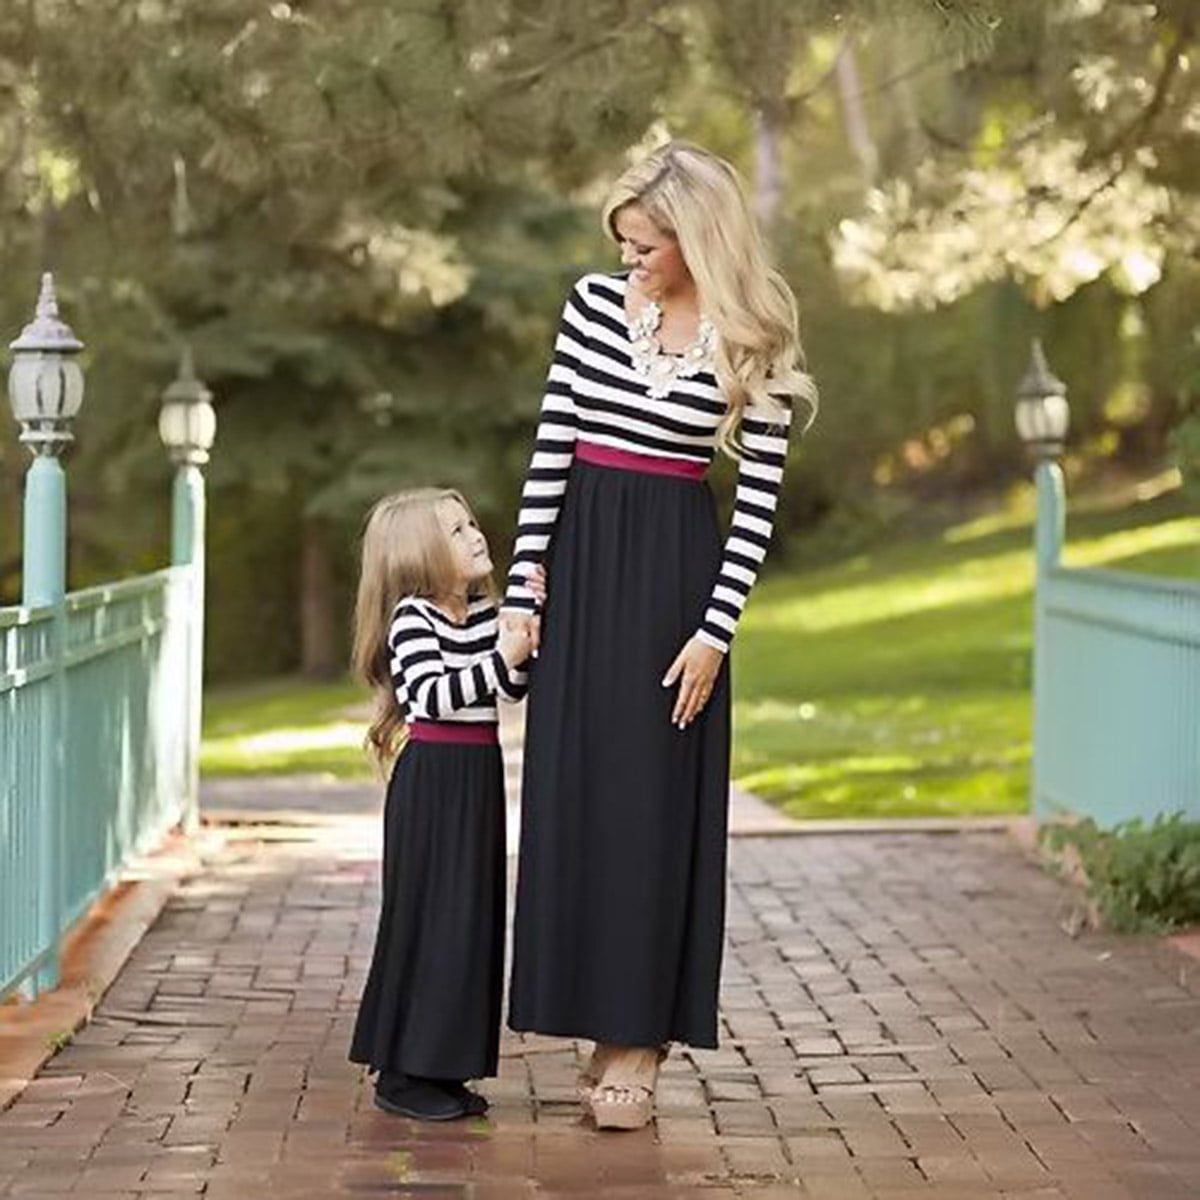 Mom daughter combo | Mom daughter matching outfits, Dresses kids girl, Mom  and baby dresses